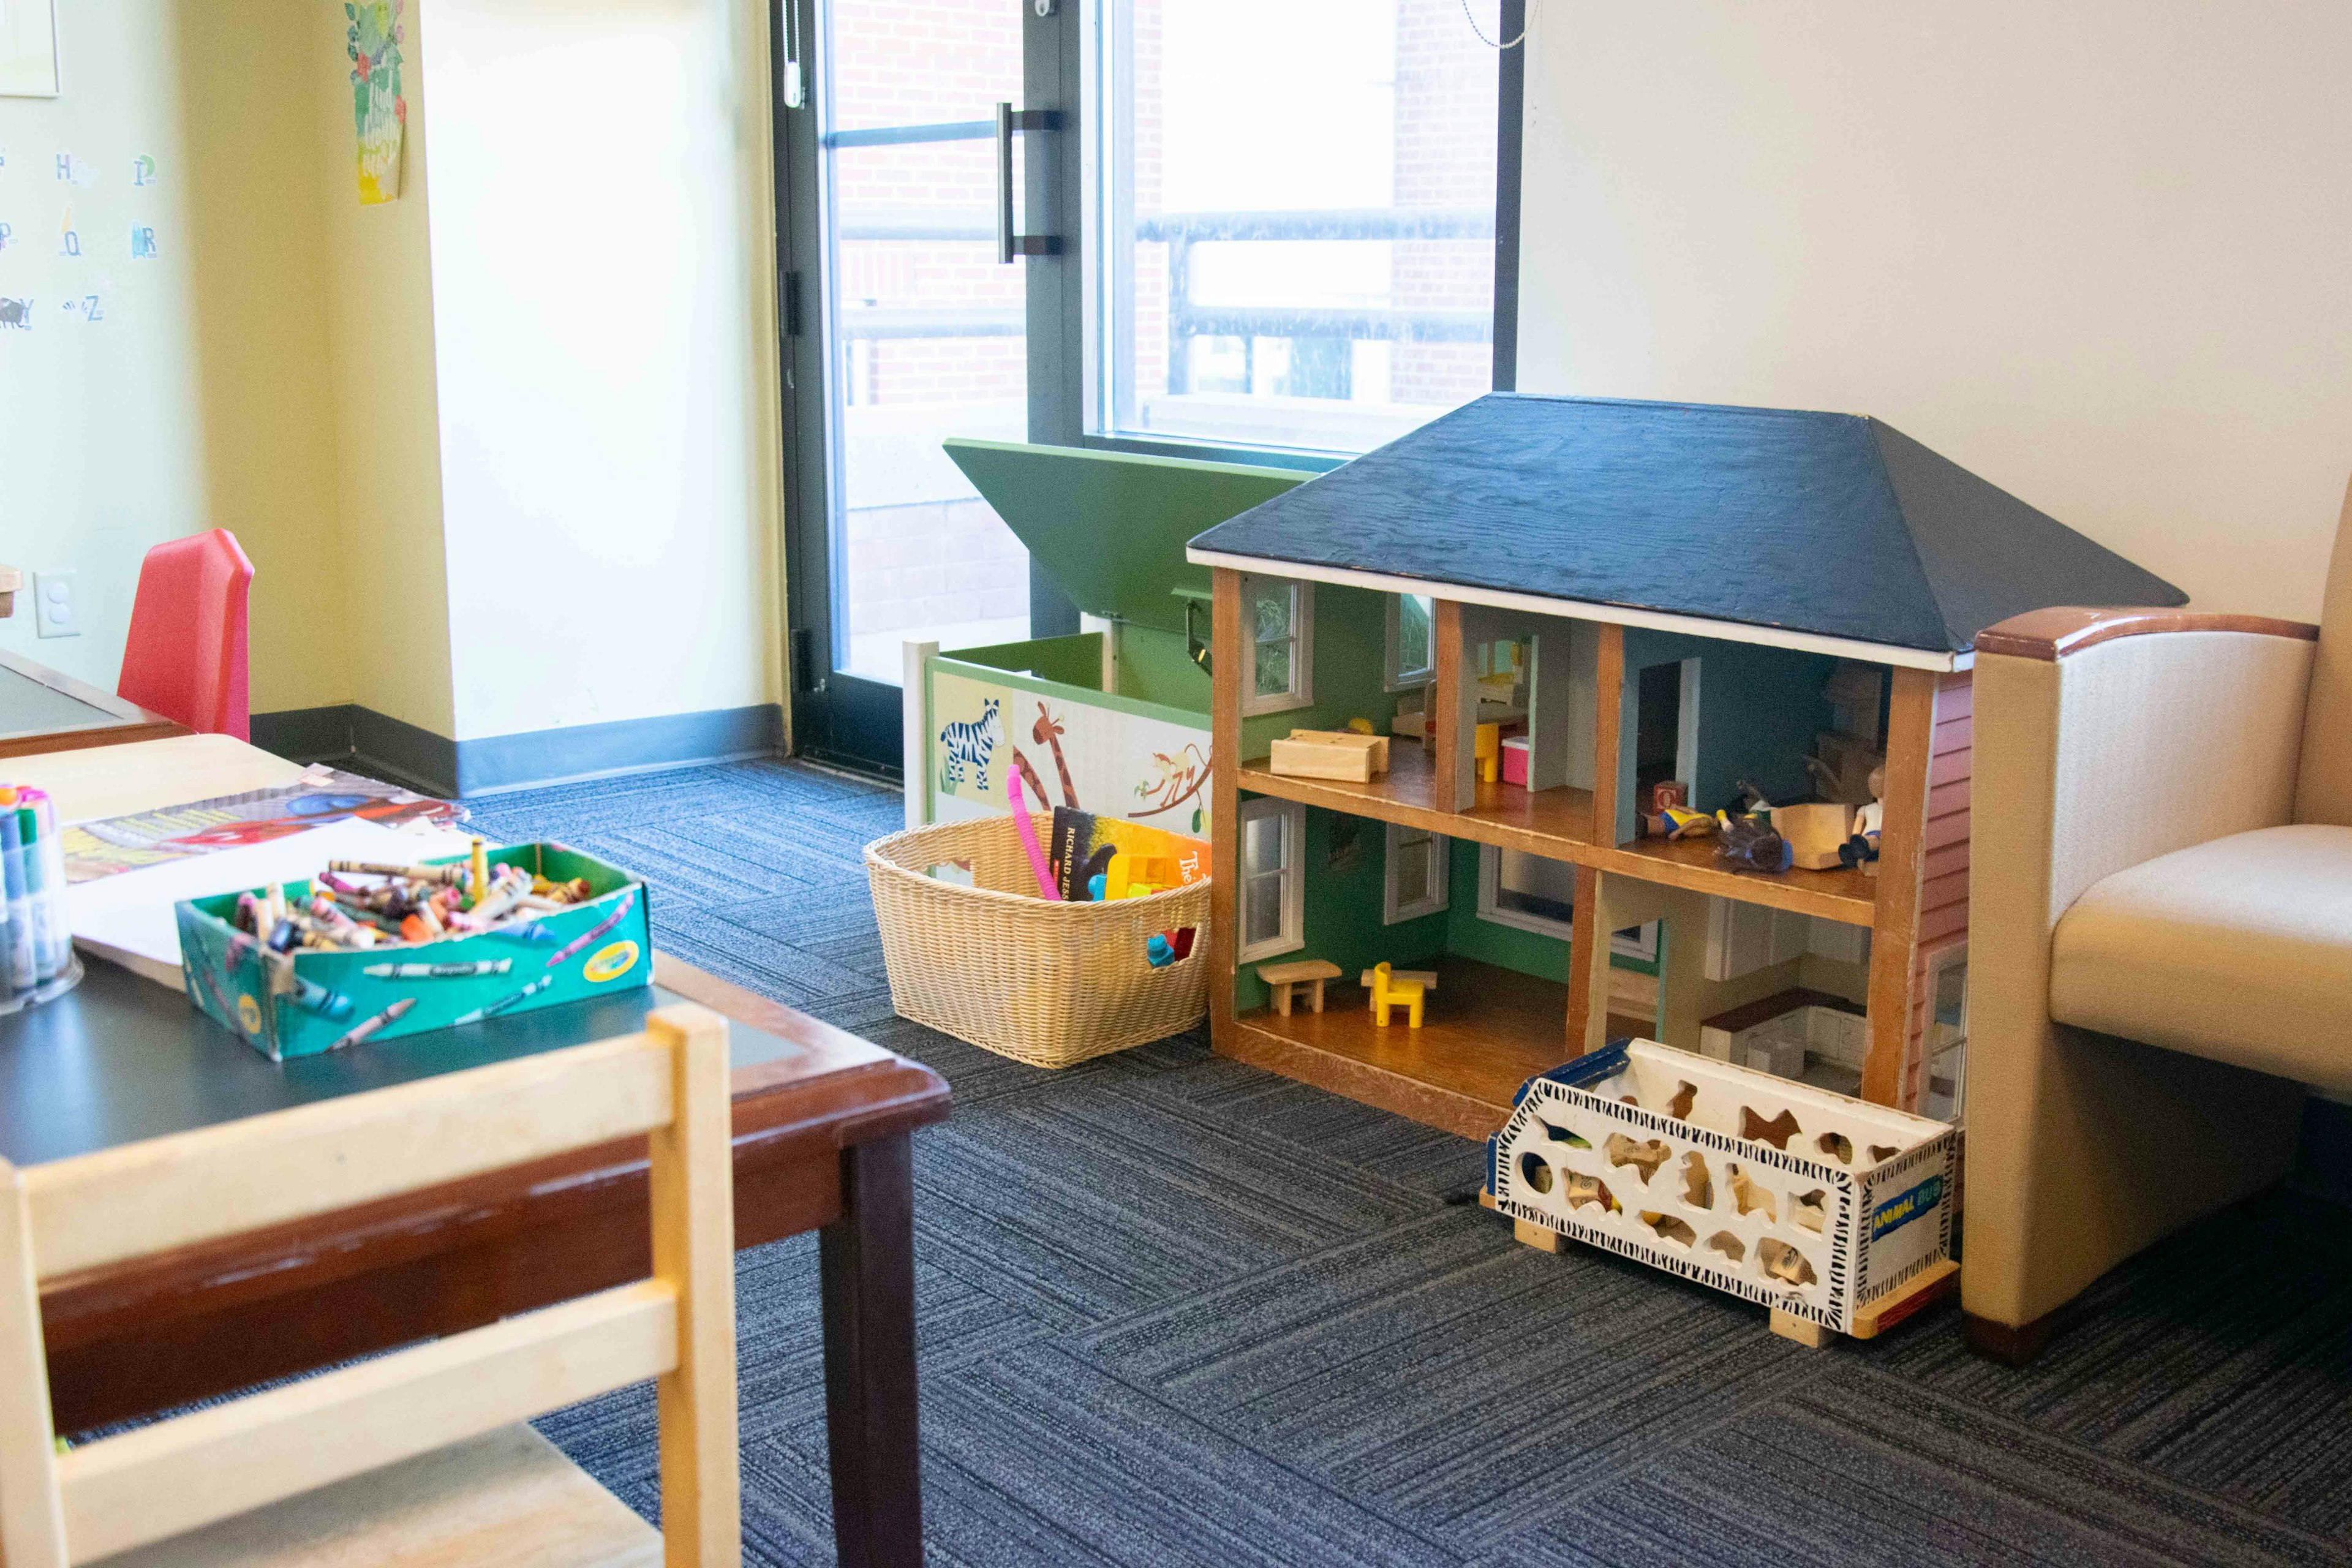 Coffman lobby play area. Doll house, crayons, and play table.